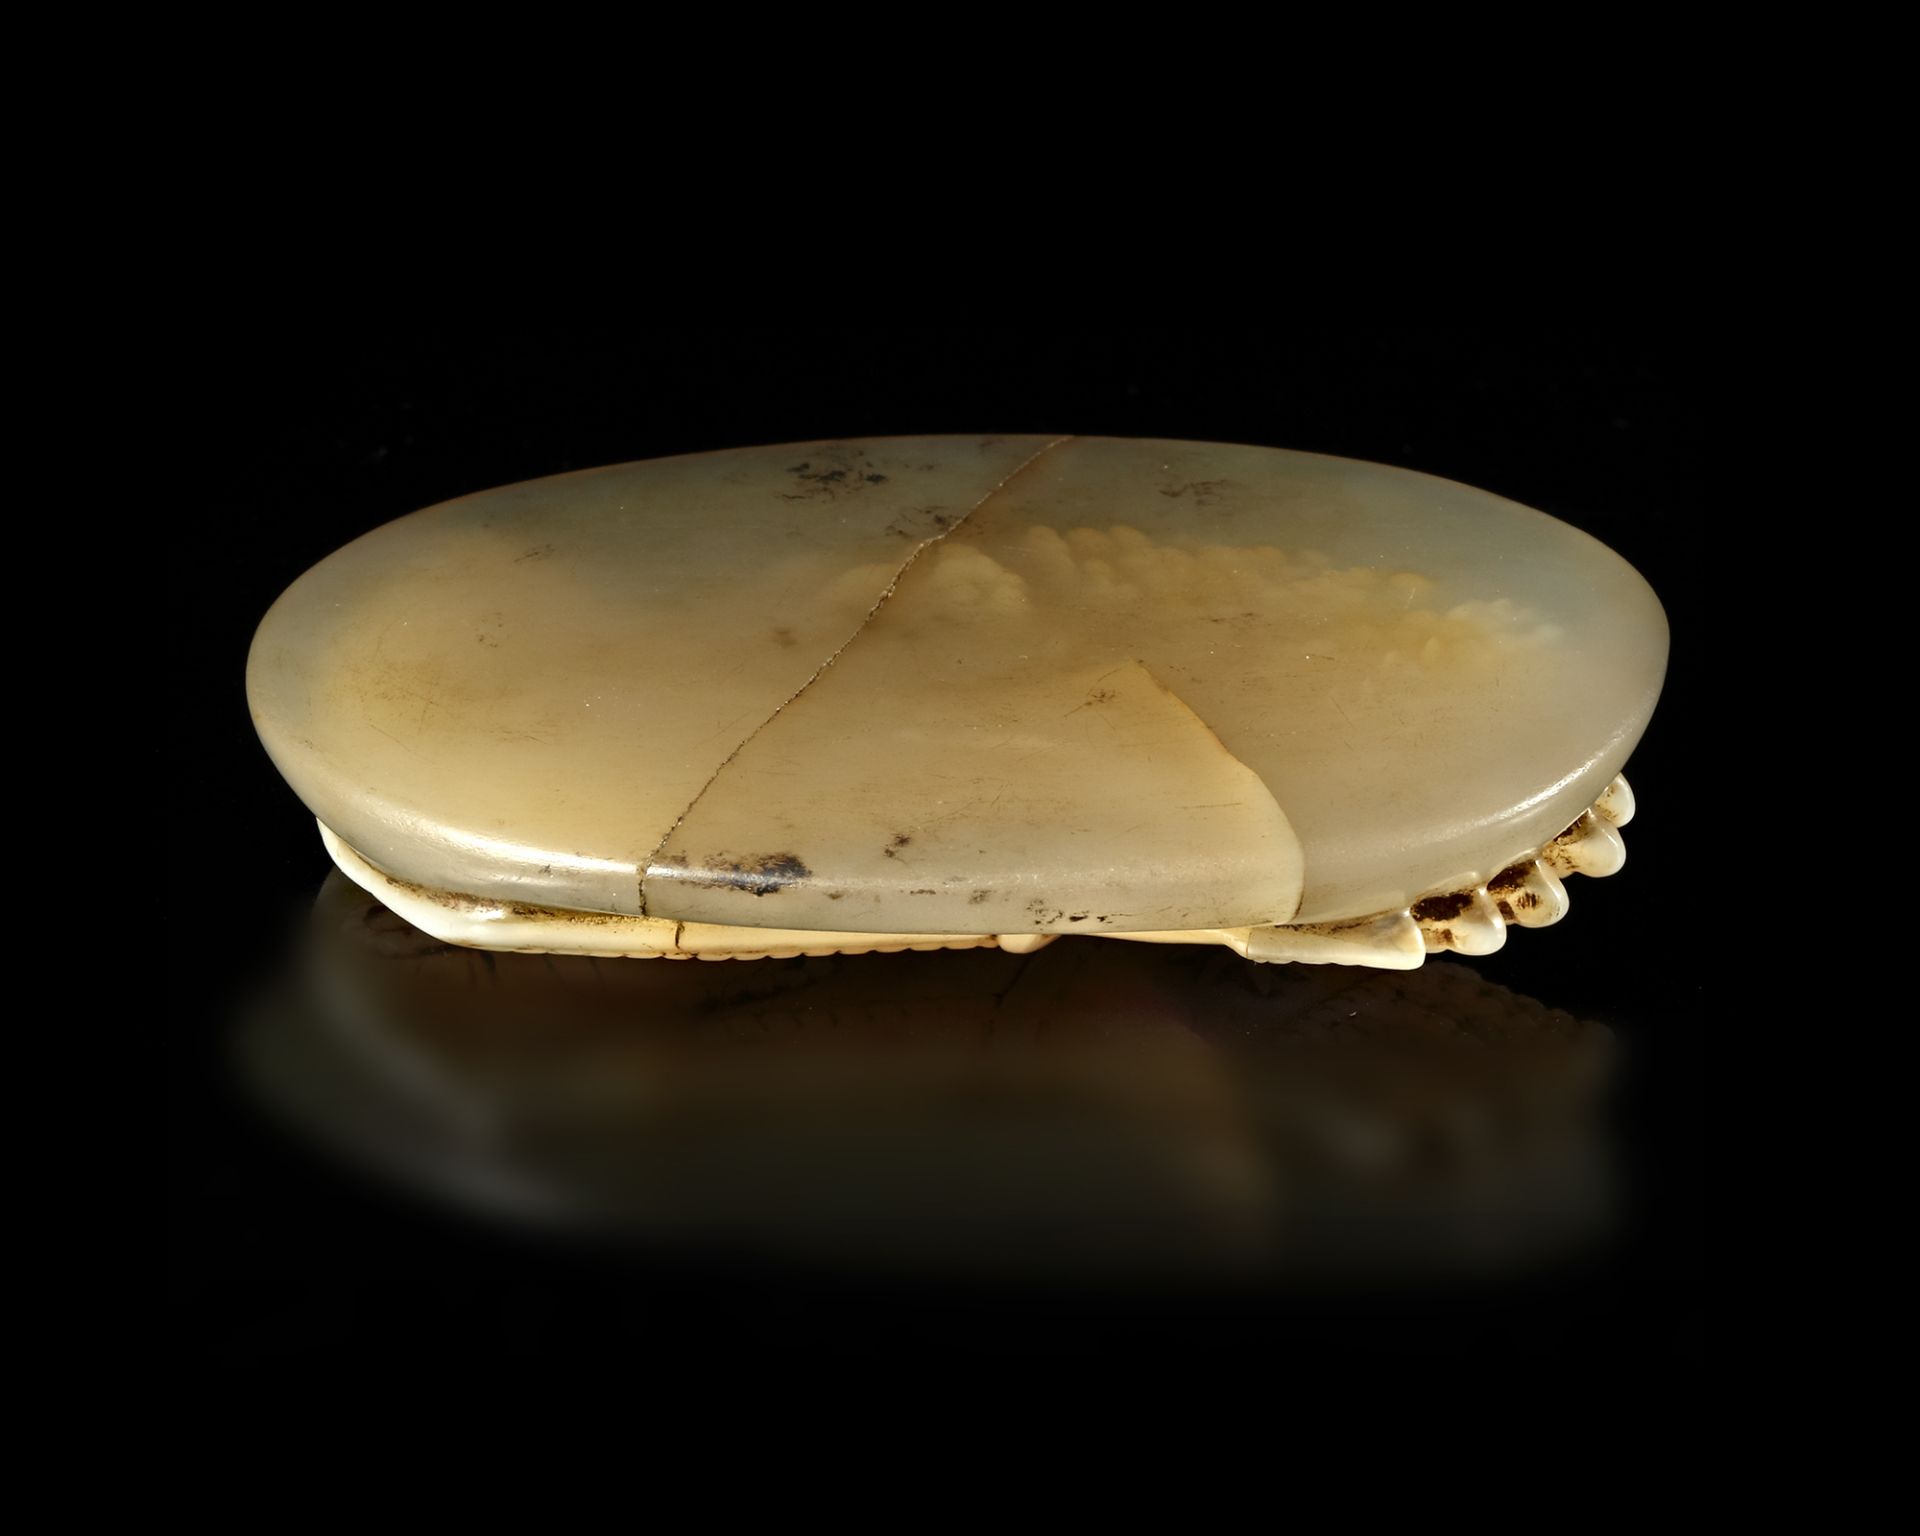 A LARGE CAMEO OF TIGRANES II OR 'THE GREAT' IN SARDONYX, 1ST CENTURY BC - Image 3 of 3